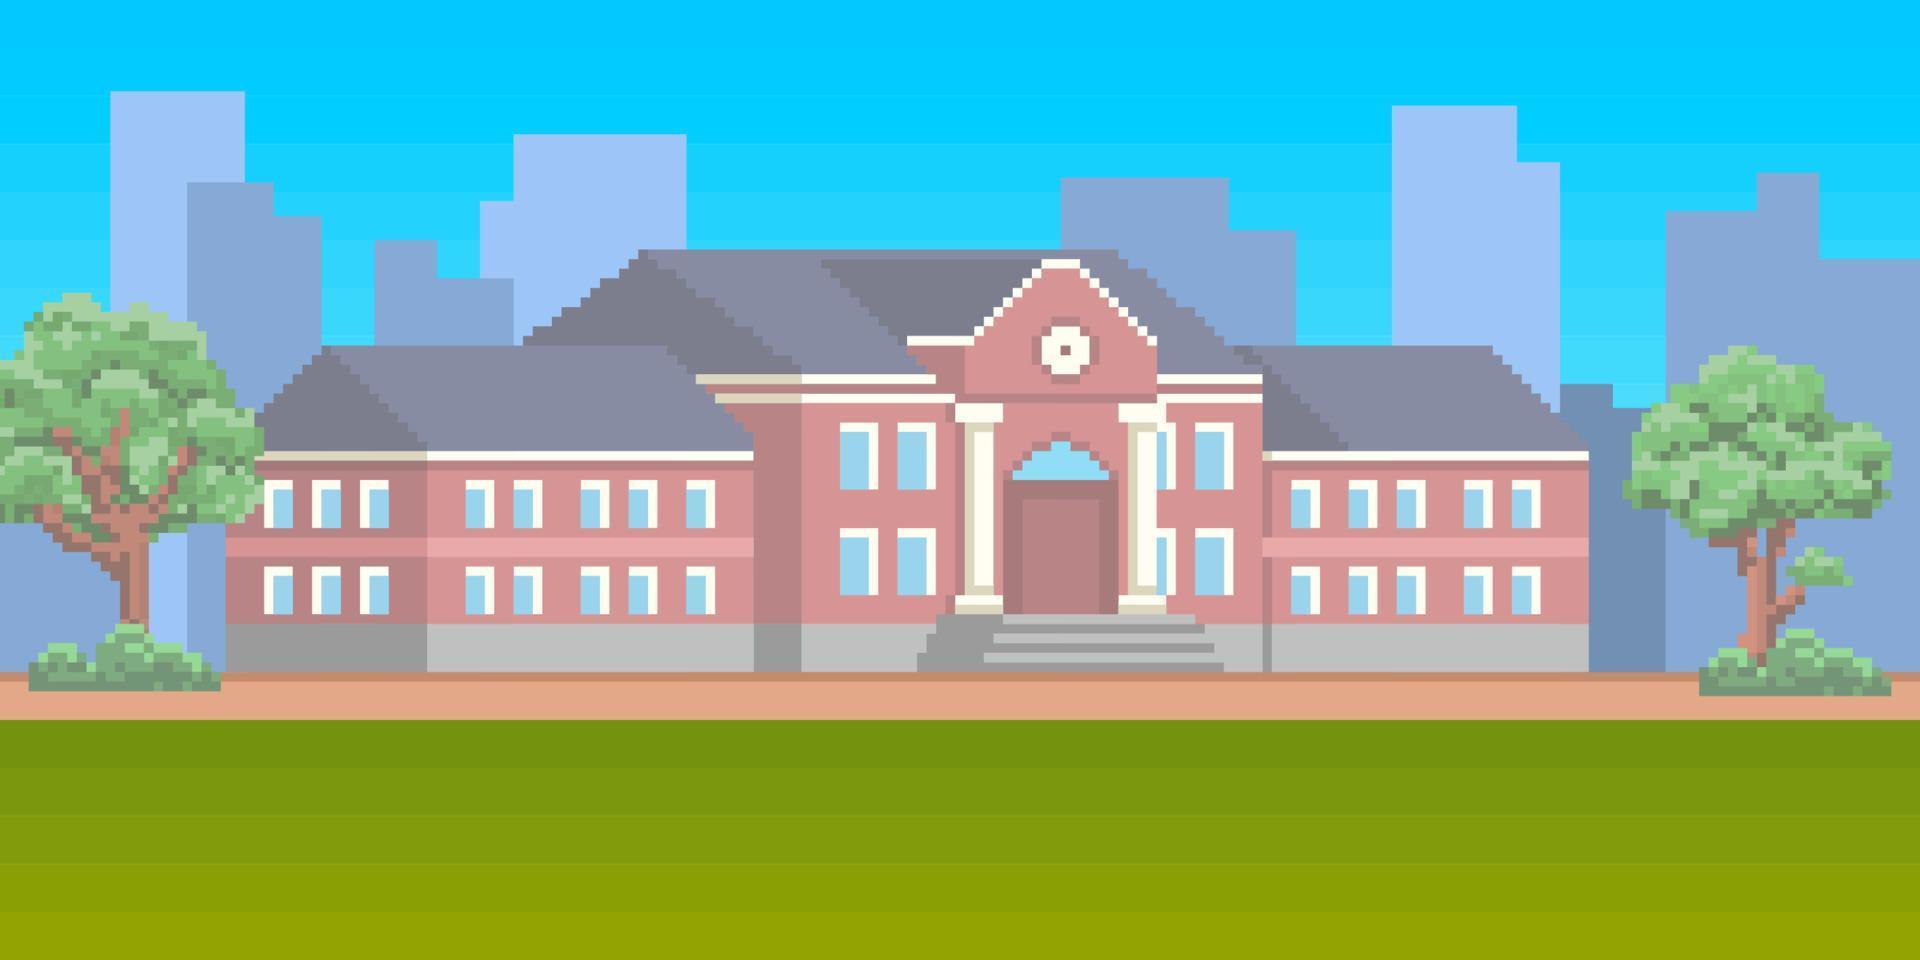 8bit pixel art school building with green lawn in front. Campus background for video game setting vector